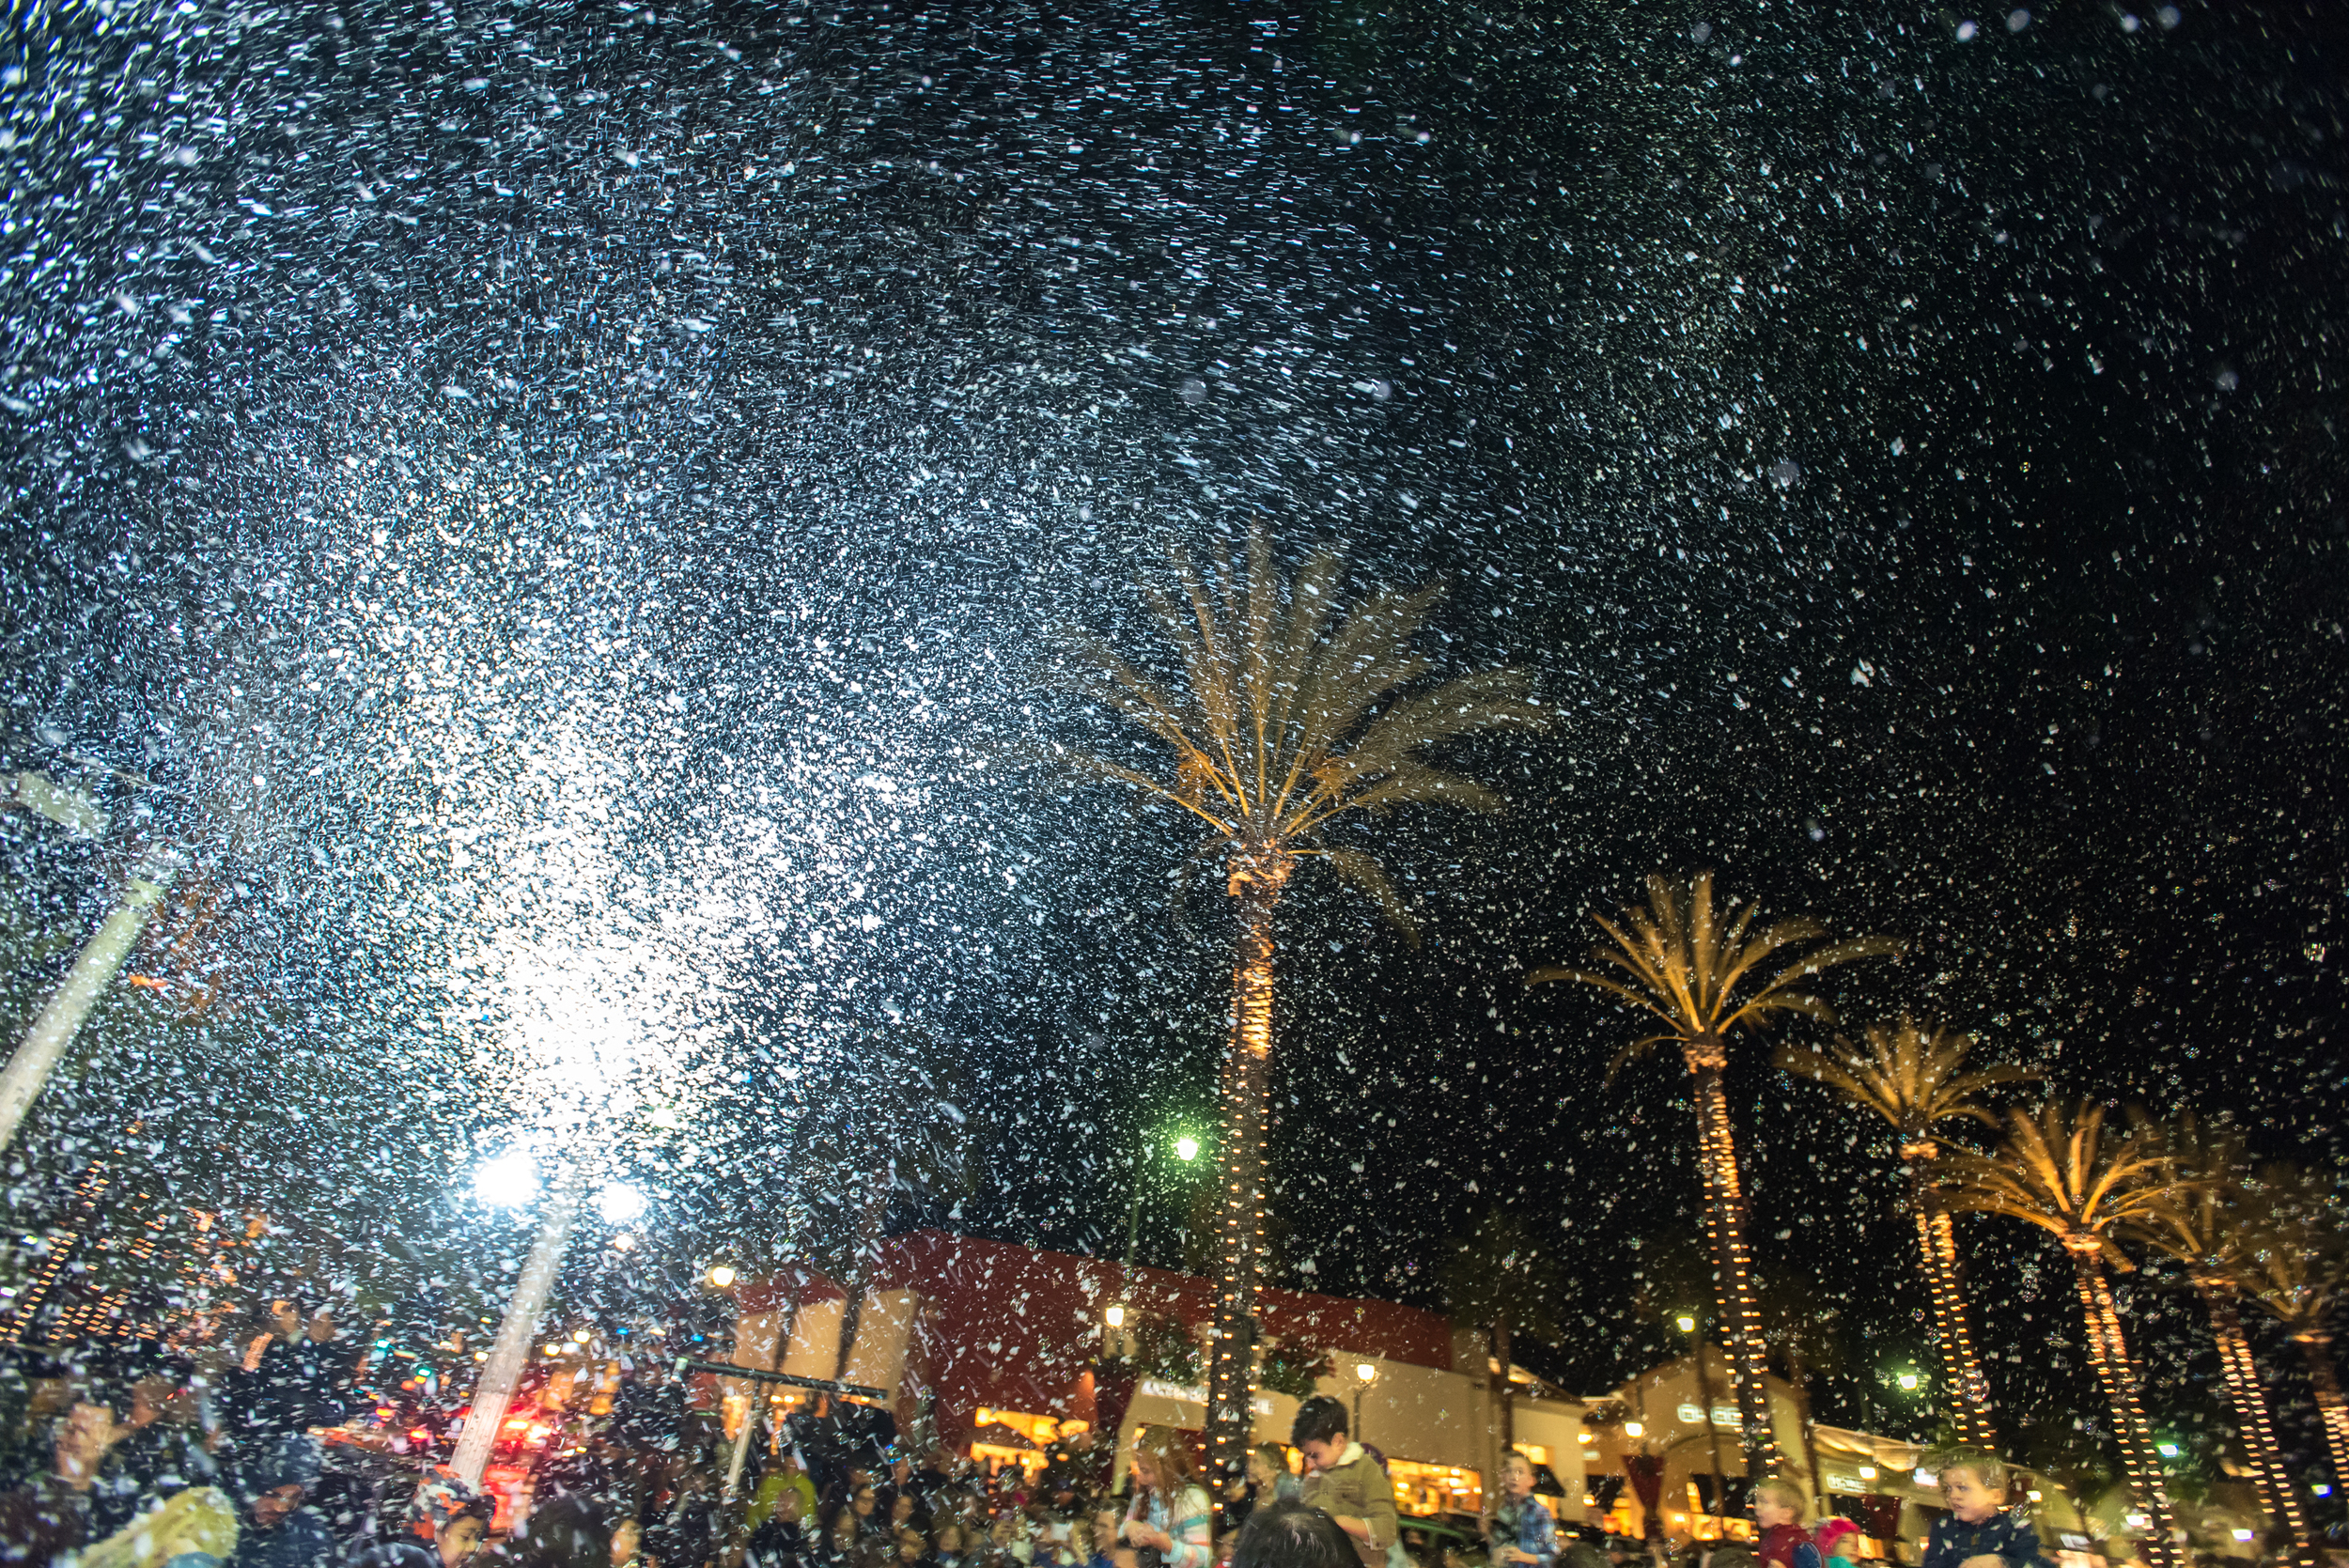  snow effects during tree lighting ceremony at Carlsbad mall 